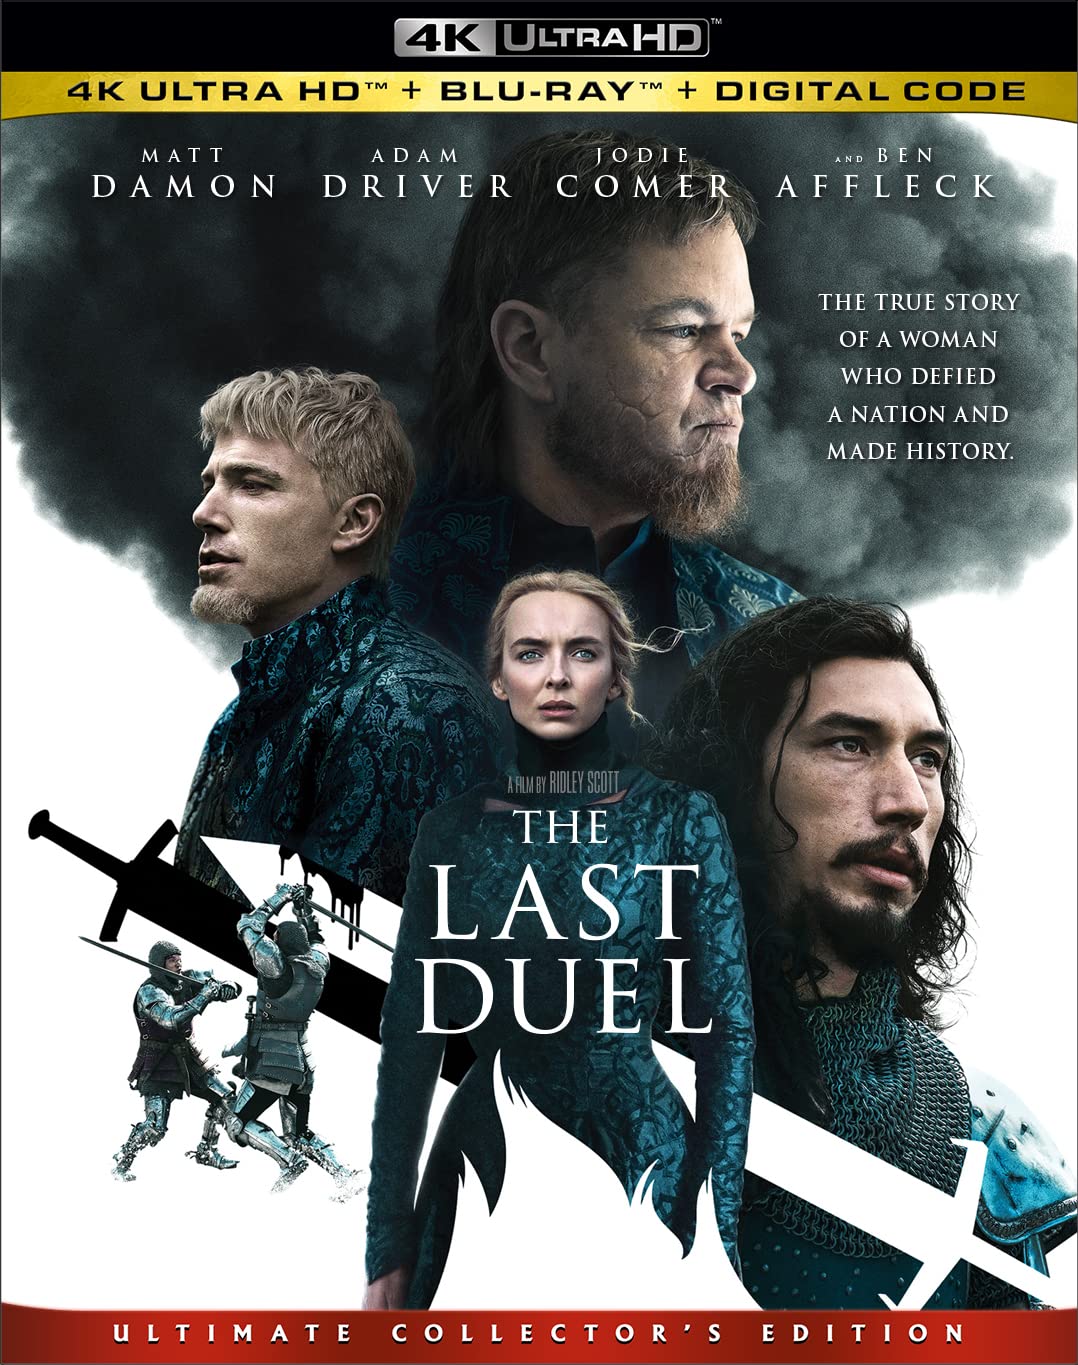 The Last Duel 4k Blu-ray front